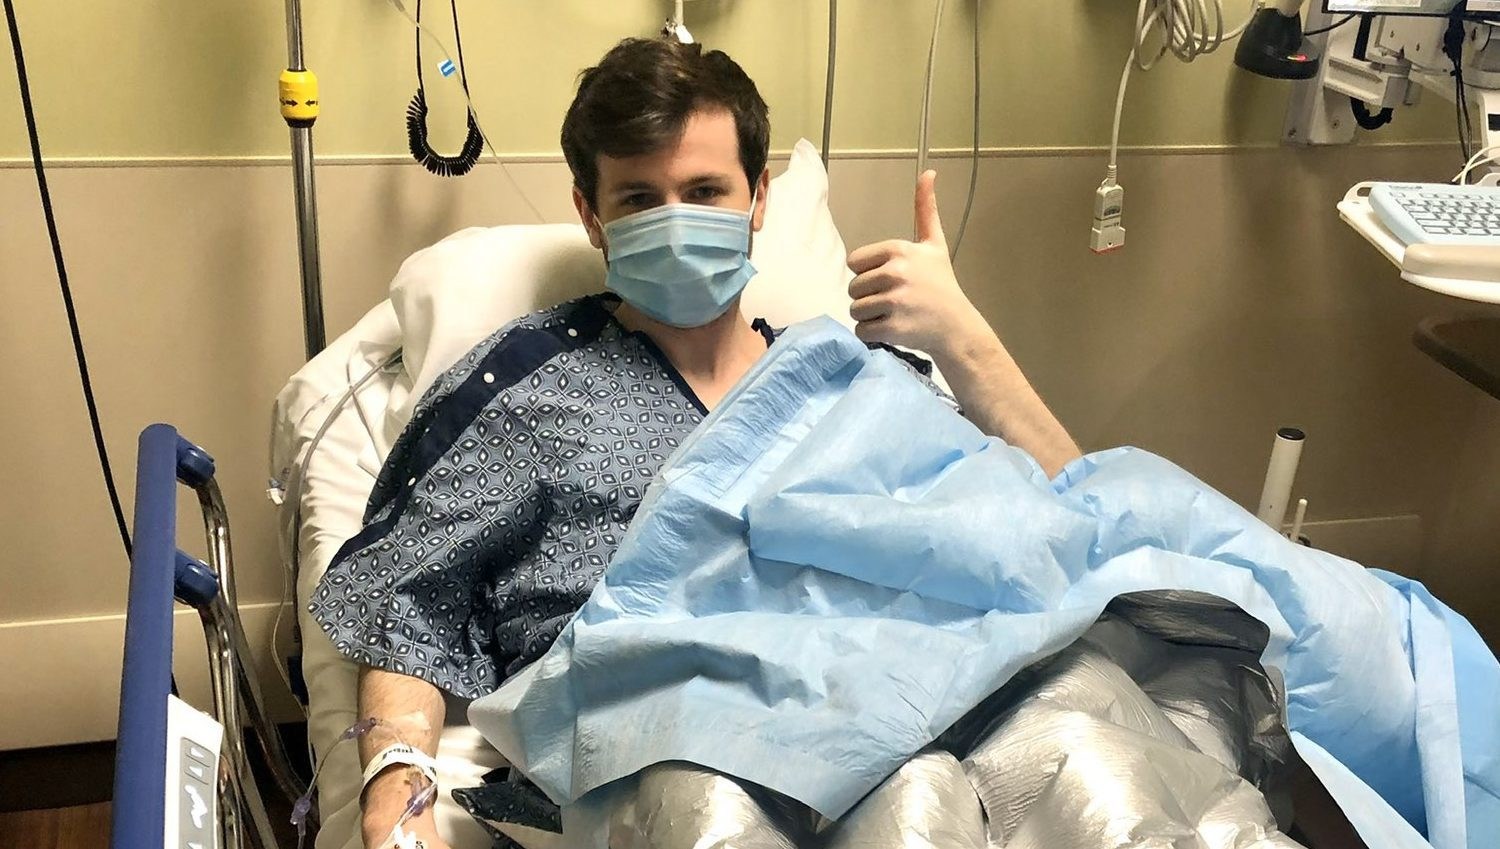 The Walking Dead star Chandler Riggs confirms he had surgery after sharing hospital photo